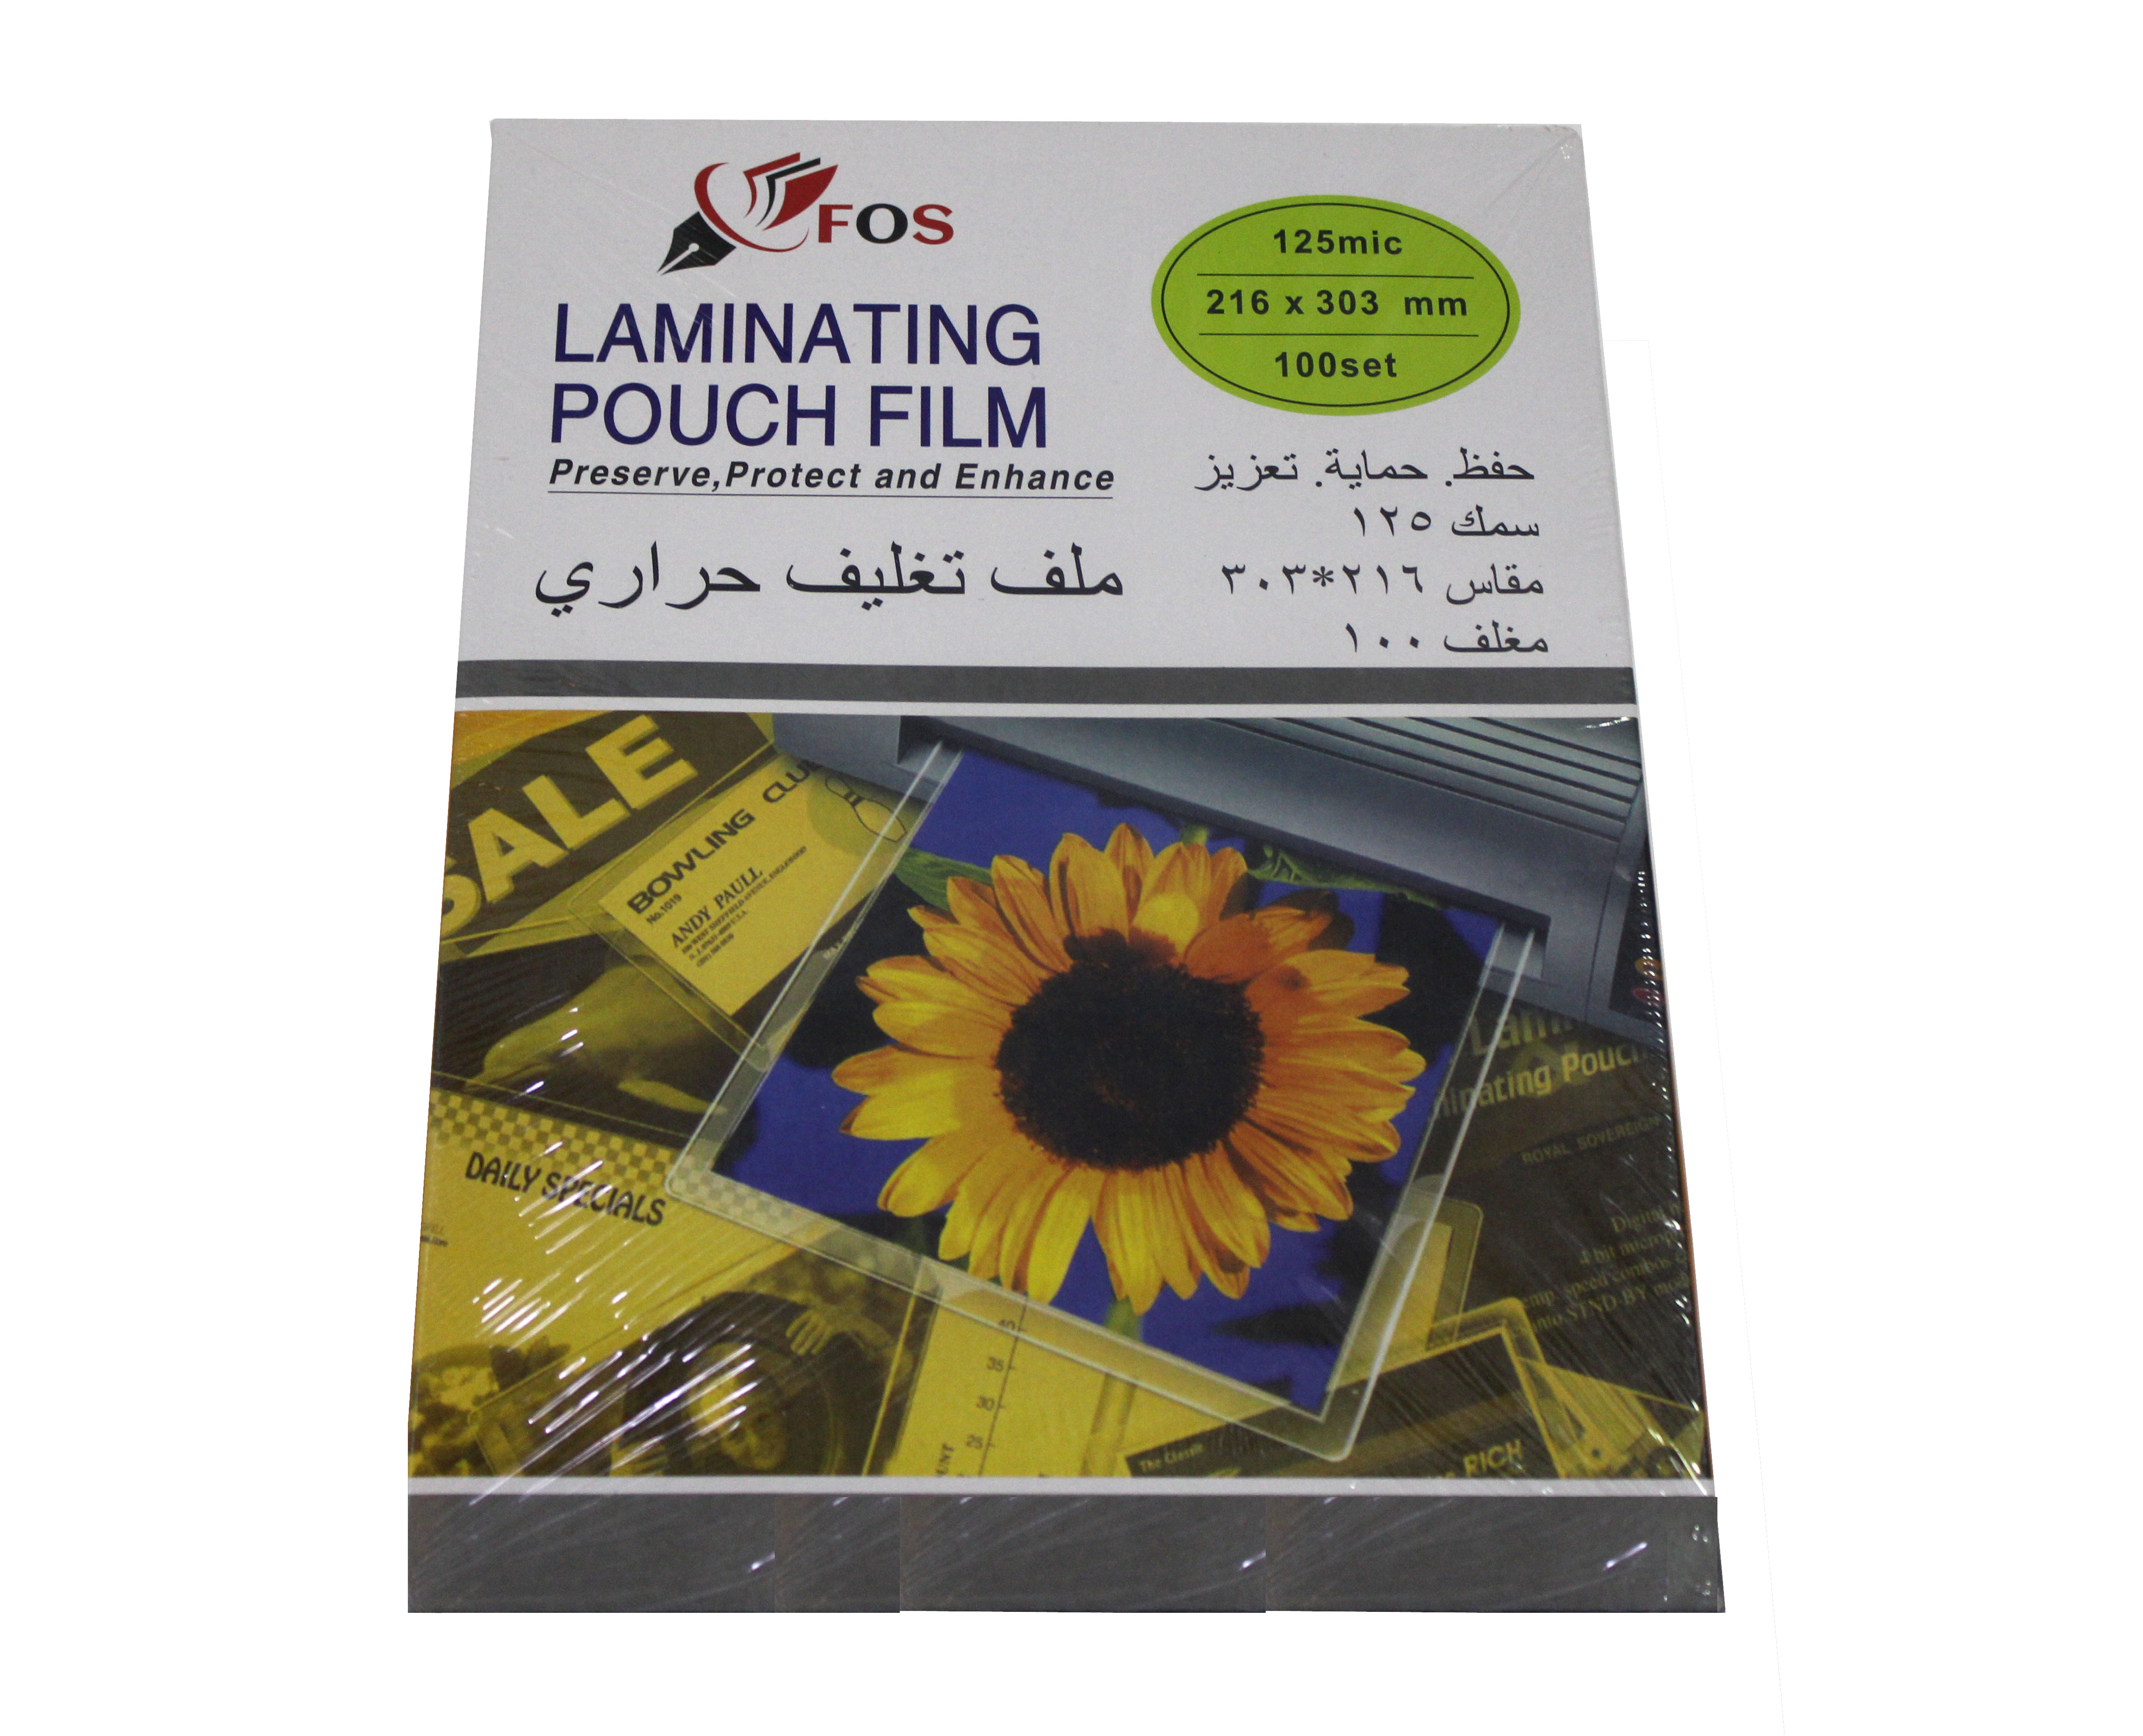 FOS LAMINATING POUCH A4 SIZE 125 MIC